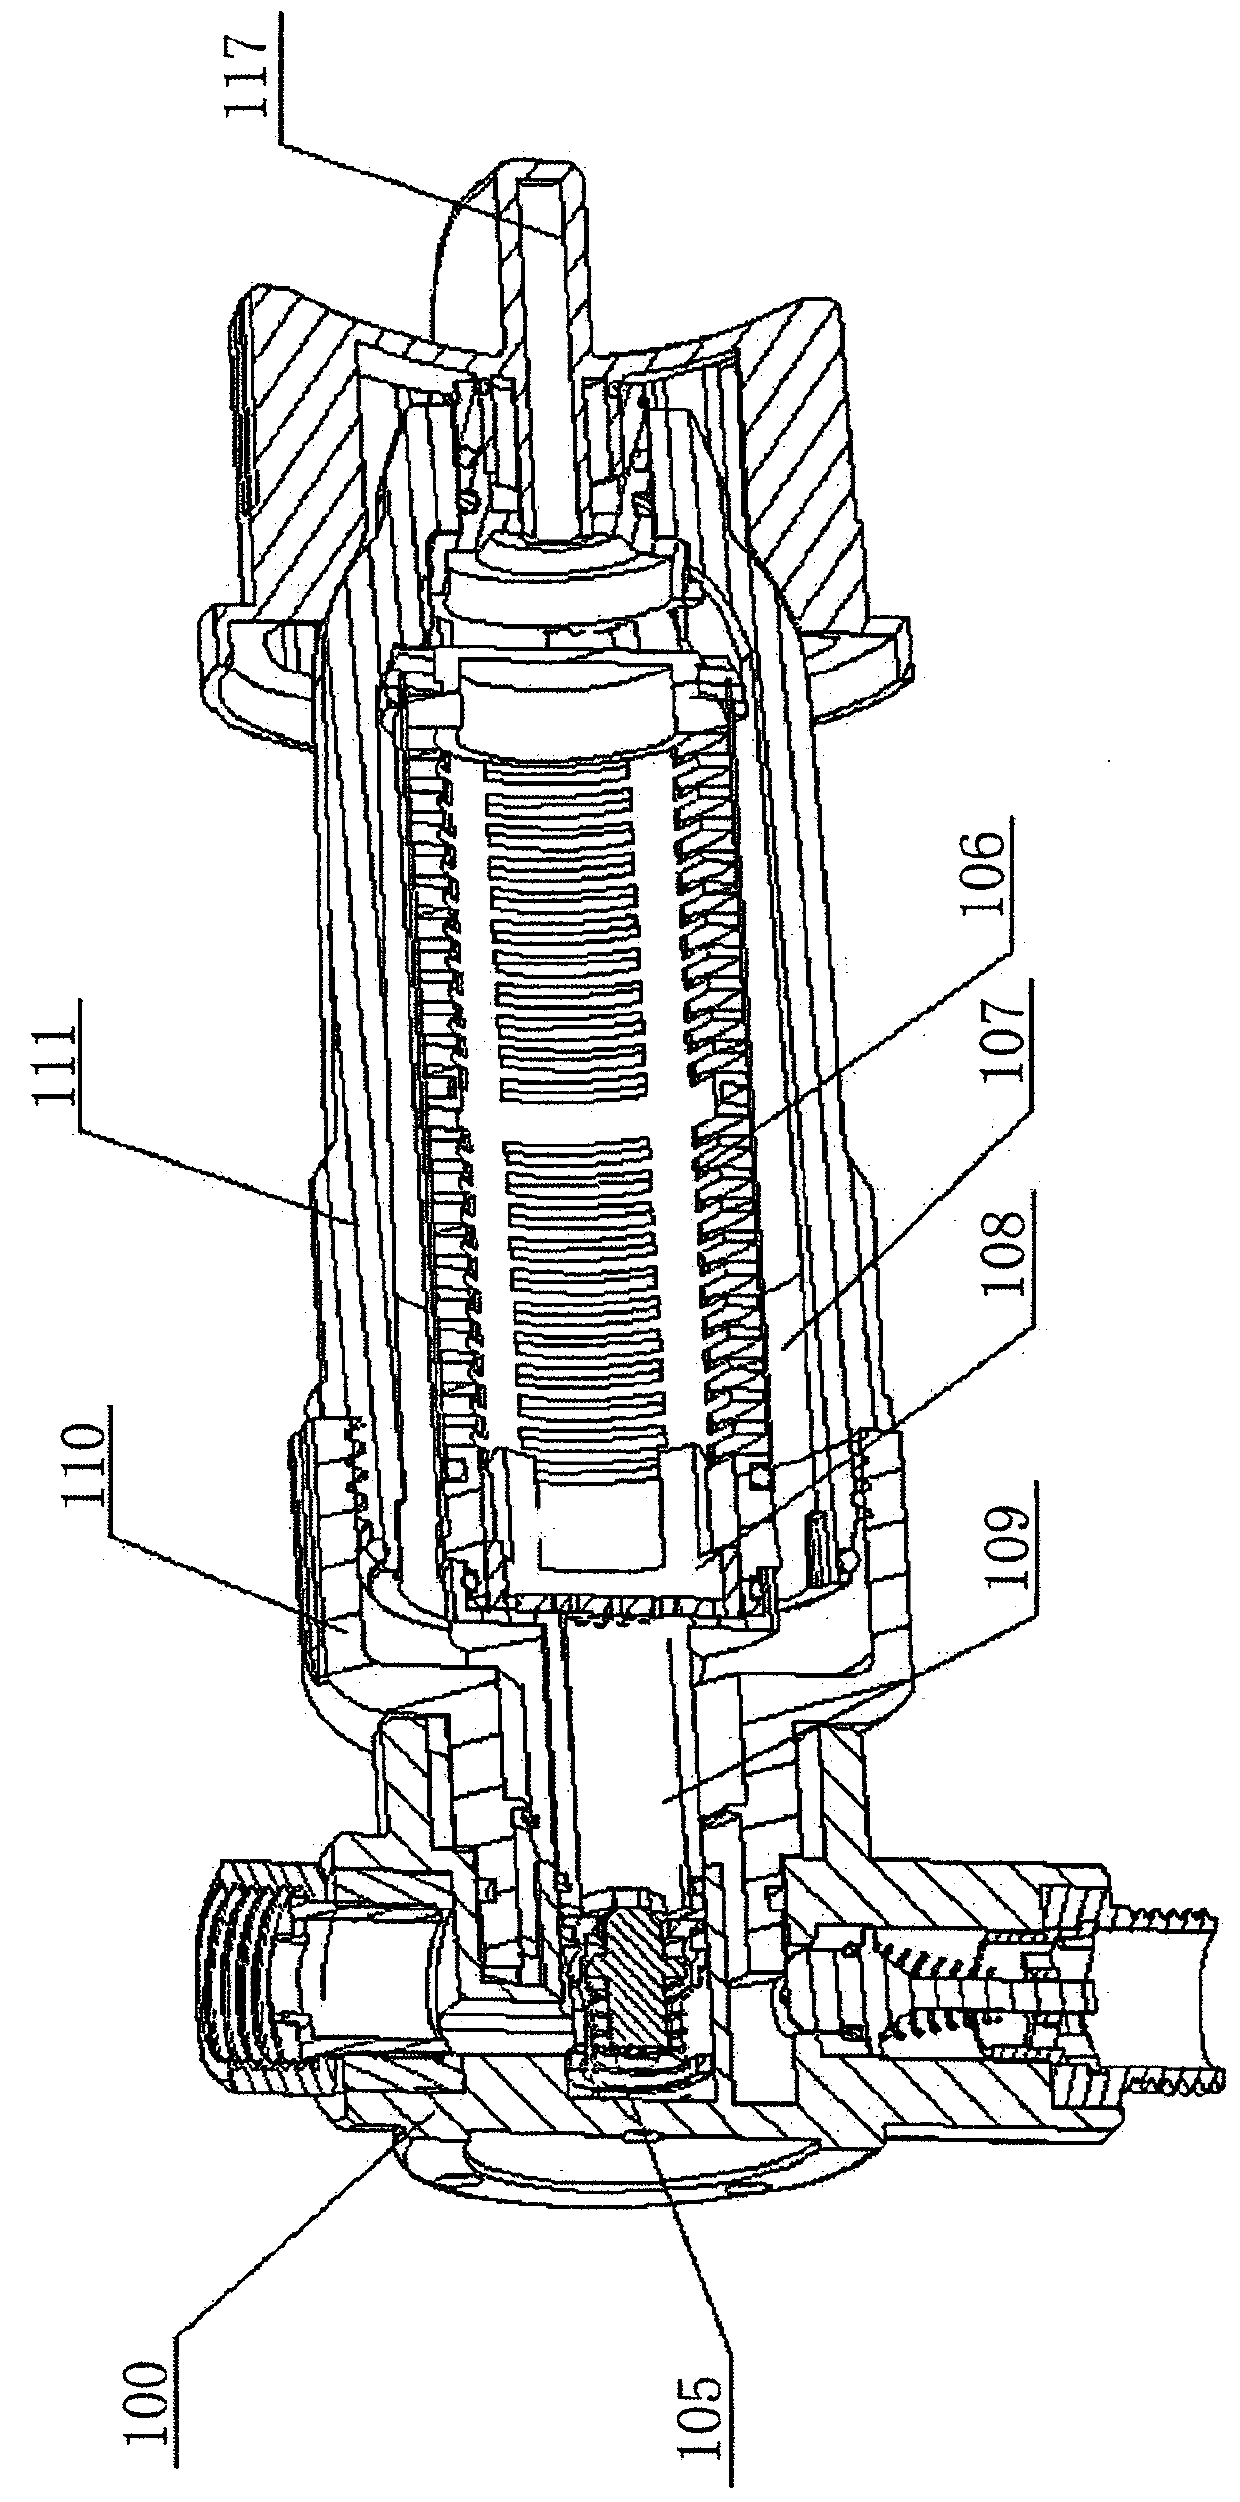 Power generation and water purification apparatus